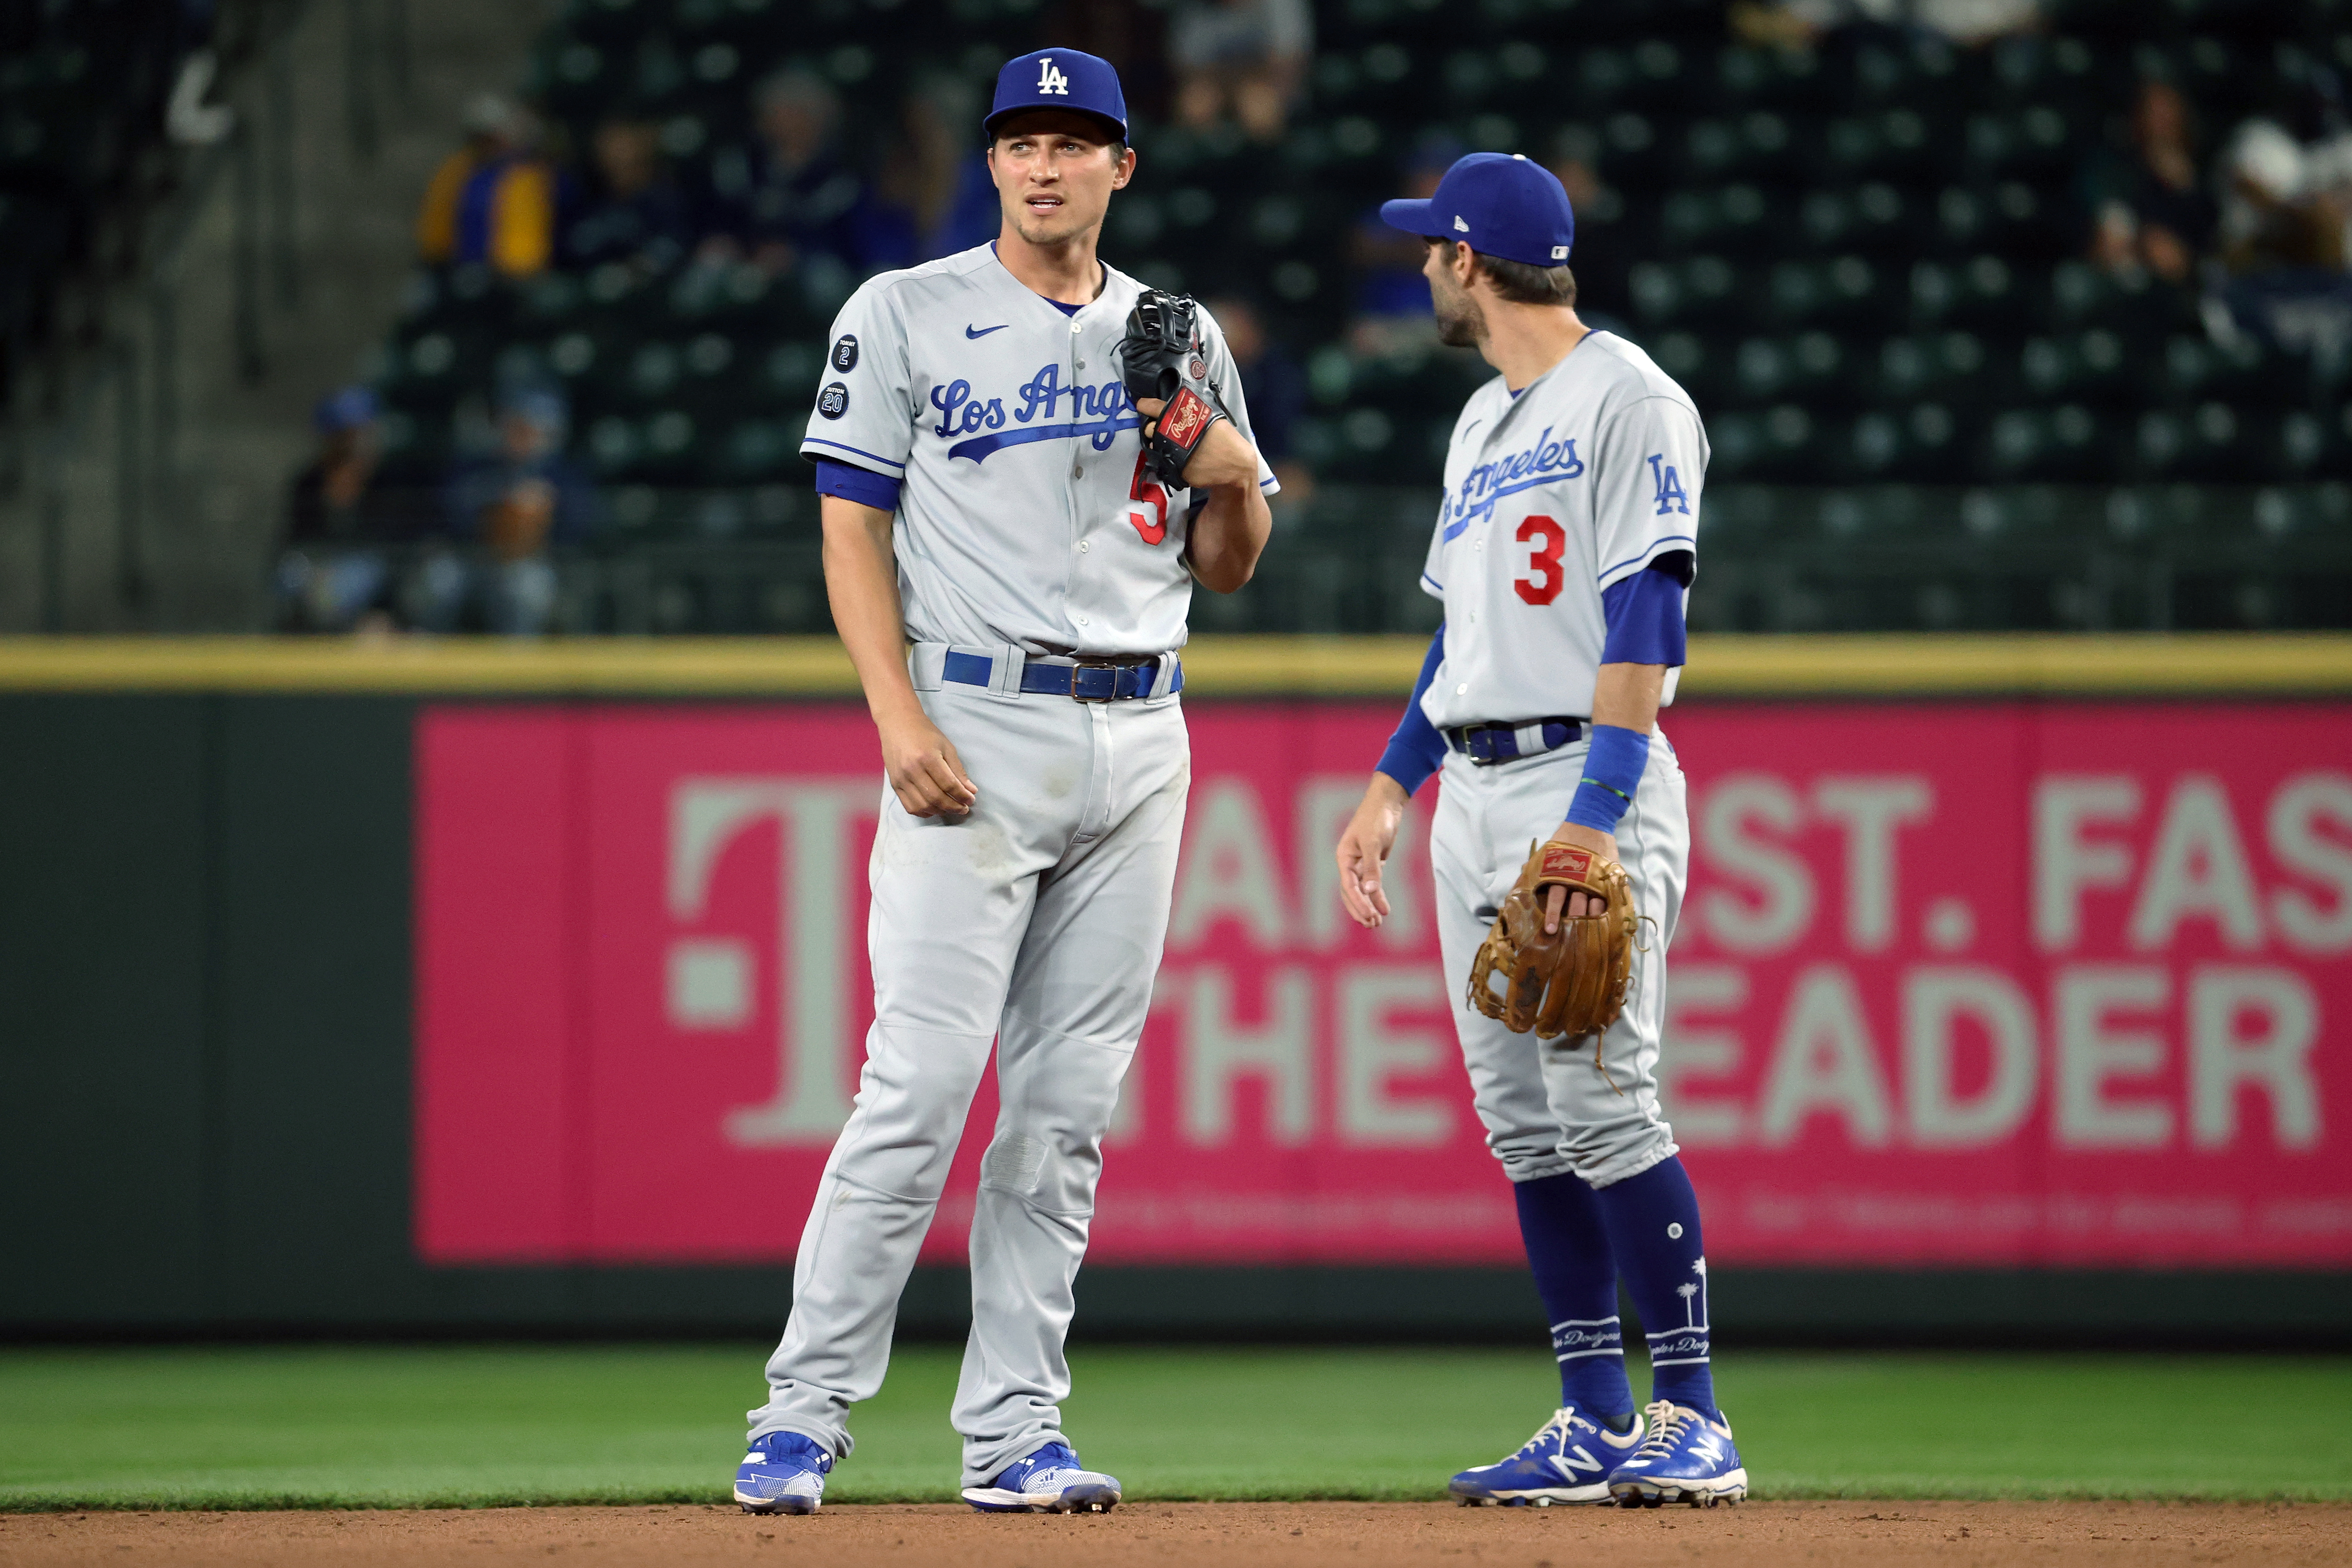 Dodgers' Corey Seager says he's 'absolutely' open to re-signing